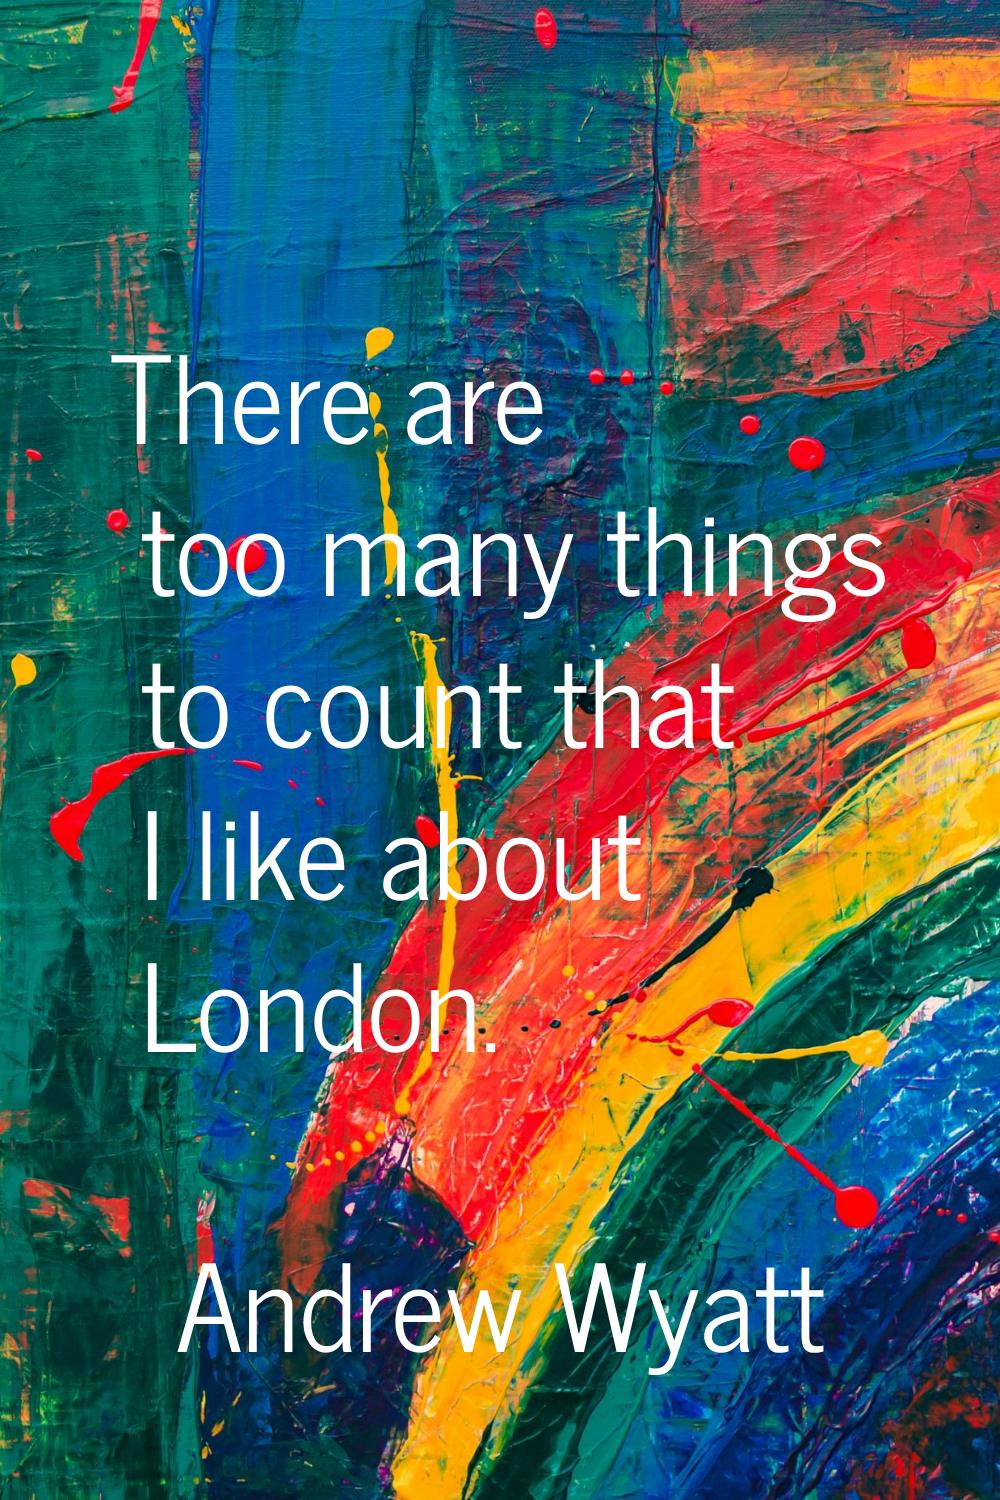 There are too many things to count that I like about London.